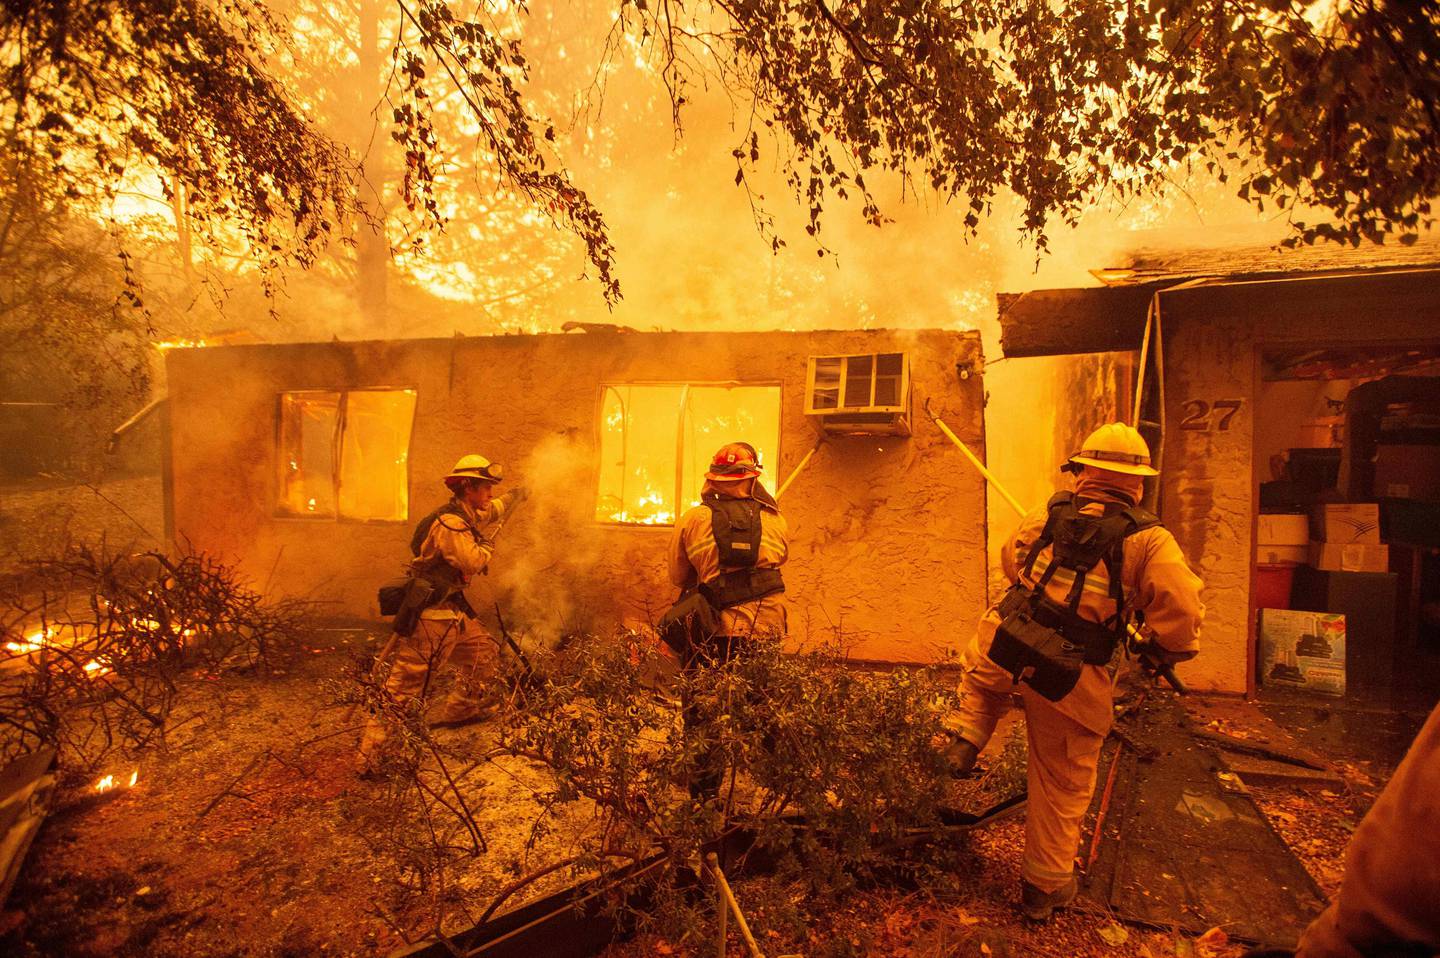 (FILES) In this file photo taken on November 9, 2018 firefighters push down a wall while battling against a burning apartment complex in Paradise, north of Sacramento, California. - US President Donald Trump on January 9, 2019 said he is cutting emergency federal aid sent to help California after devastating wildfires unless the Democratic-led state gets its "act together.""Billions of dollars are sent to the State of California for Forrest fires that, with proper Forrest Management, would never happen," Trump tweeted, initially misspelling the word forest before repeating the tweet with the word corrected."Unless they get their act together, which is unlikely, I have ordered FEMA to send no more money. It is a disgraceful situation in lives & money!" he said, referring to the Federal Emergency Management Agency. (Photo by Josh Edelson / AFP)